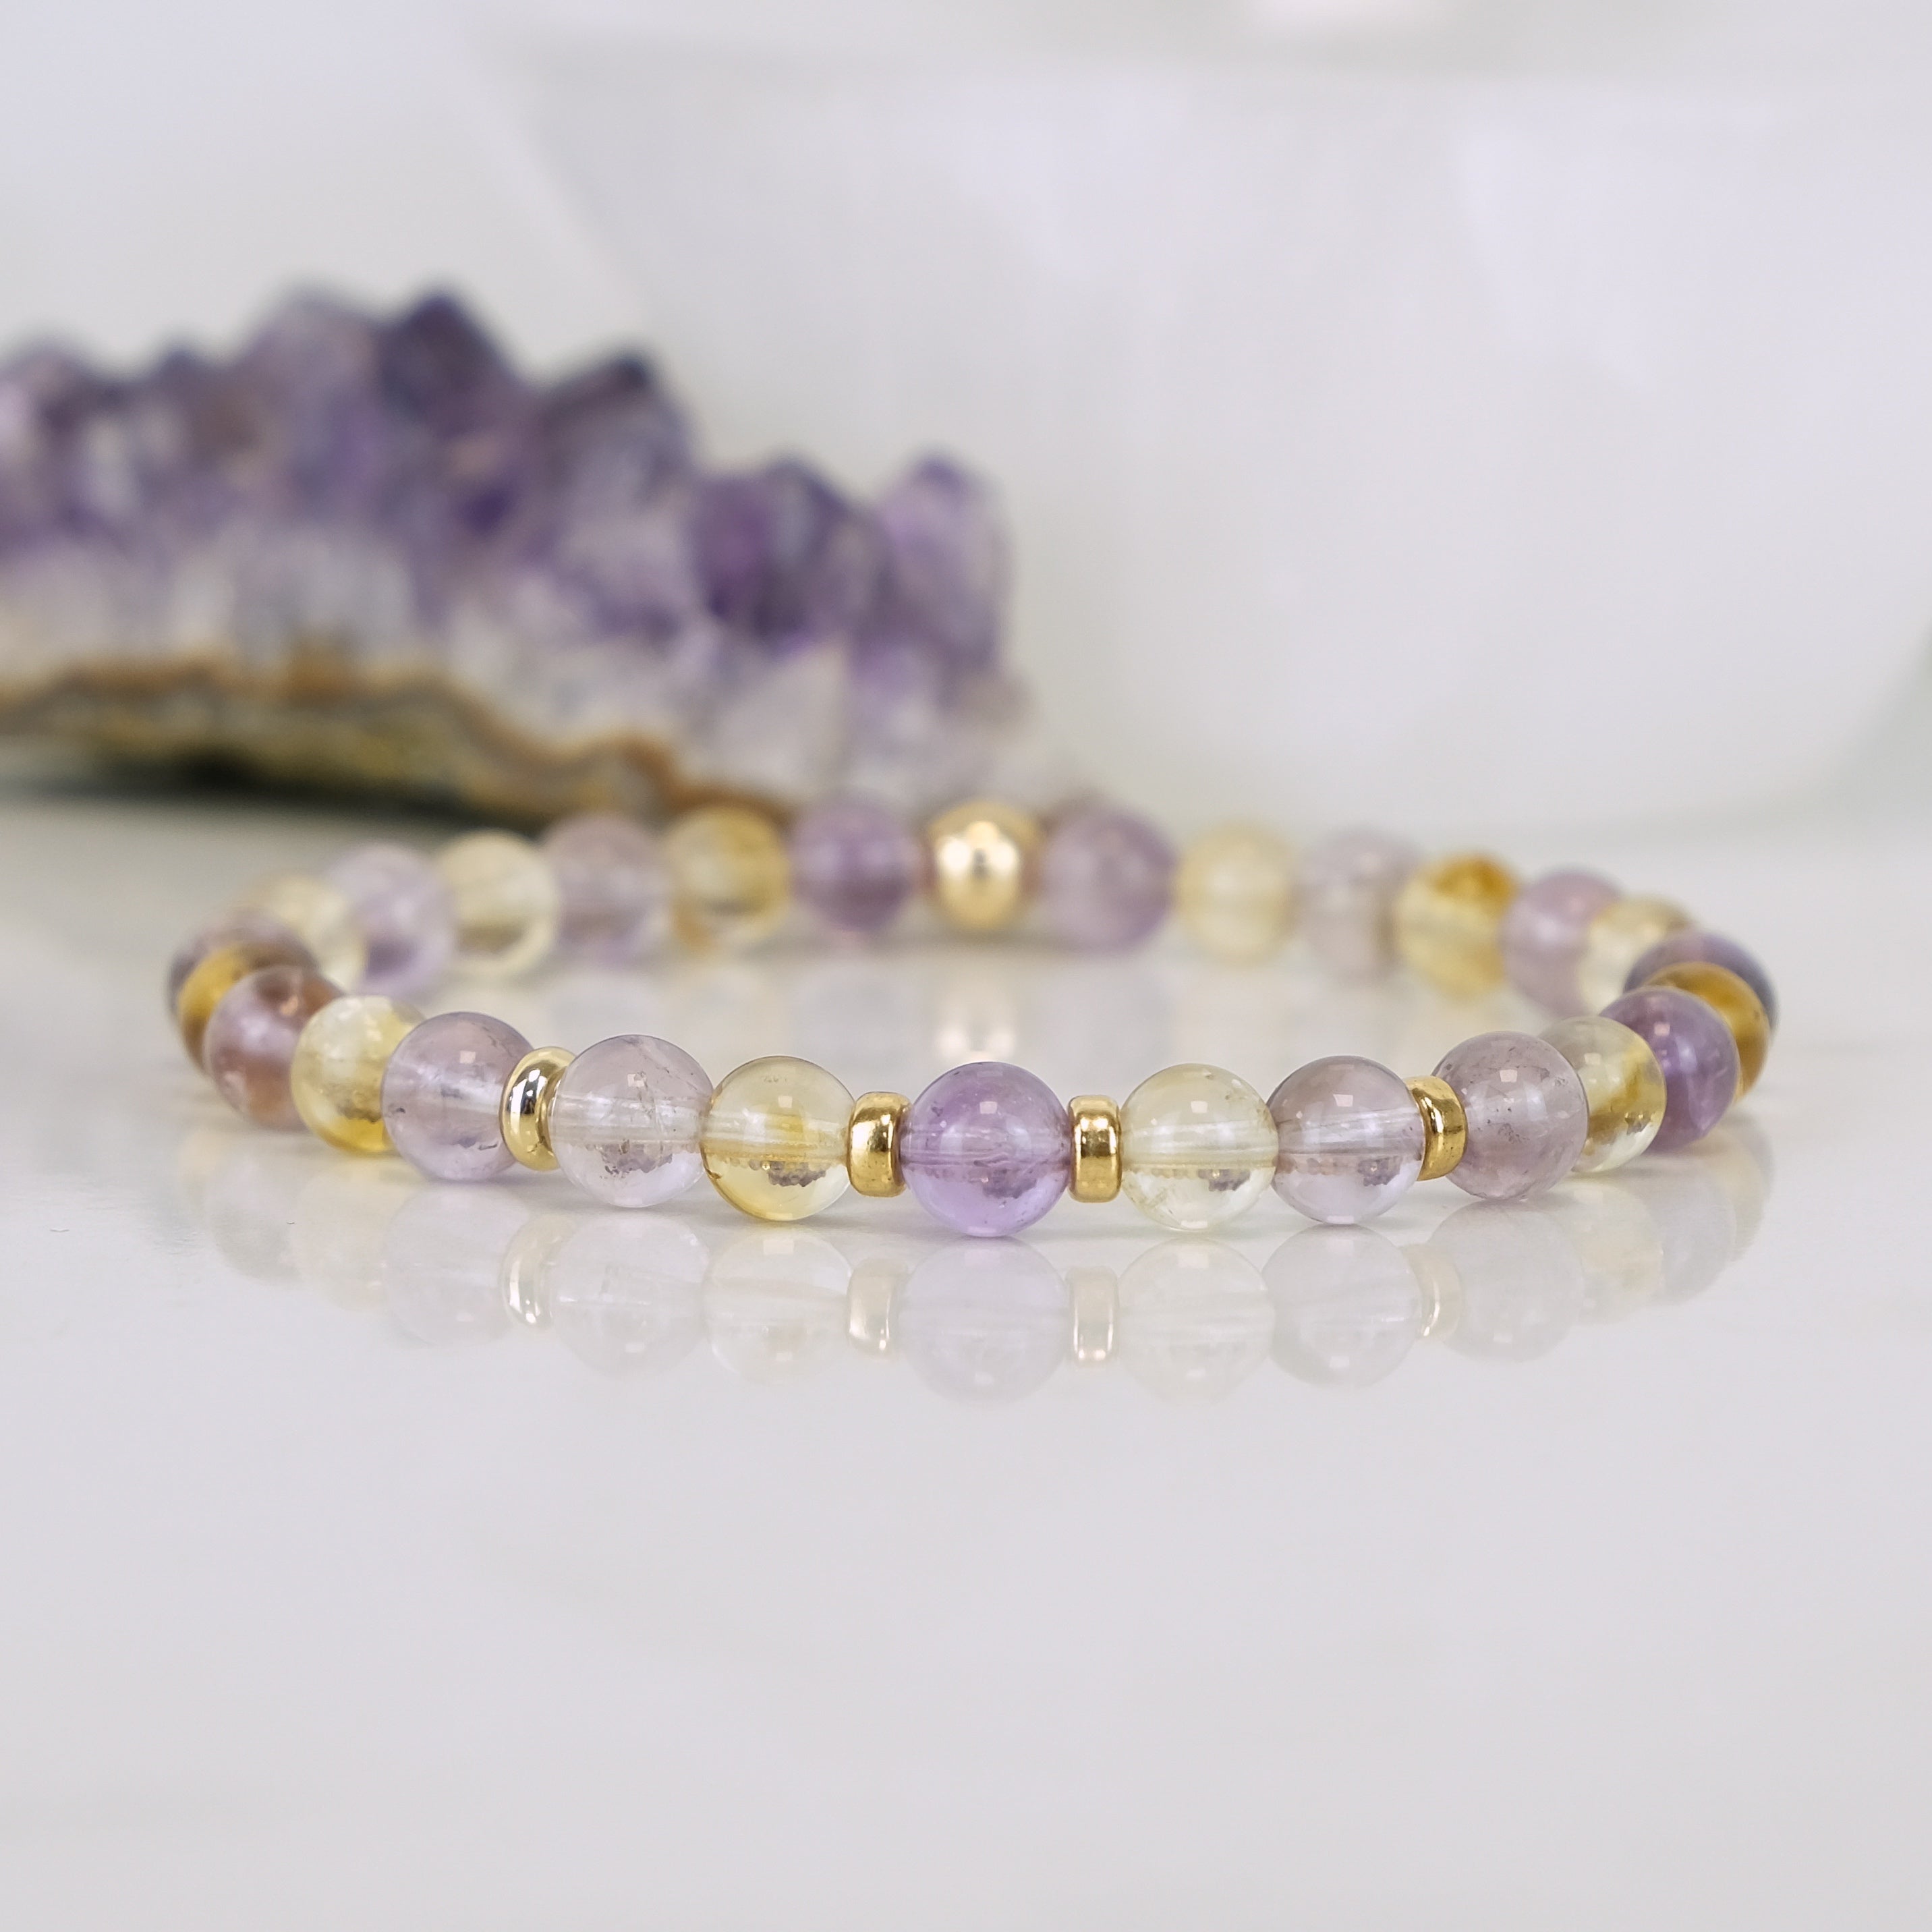 An Amethyst and citrine gemstone bracelet with gold filled accessories